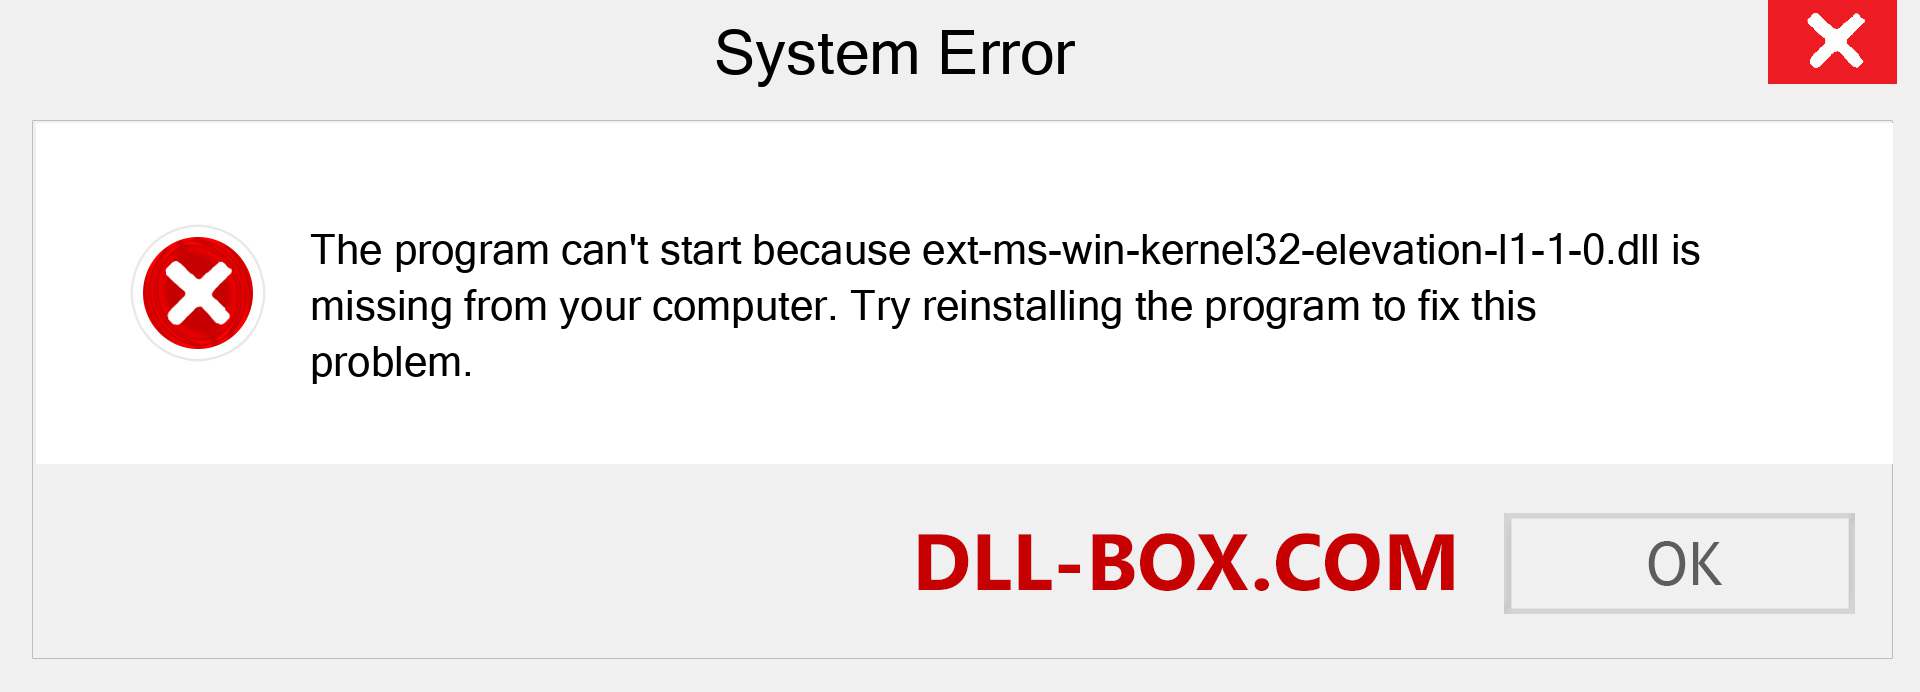  ext-ms-win-kernel32-elevation-l1-1-0.dll file is missing?. Download for Windows 7, 8, 10 - Fix  ext-ms-win-kernel32-elevation-l1-1-0 dll Missing Error on Windows, photos, images